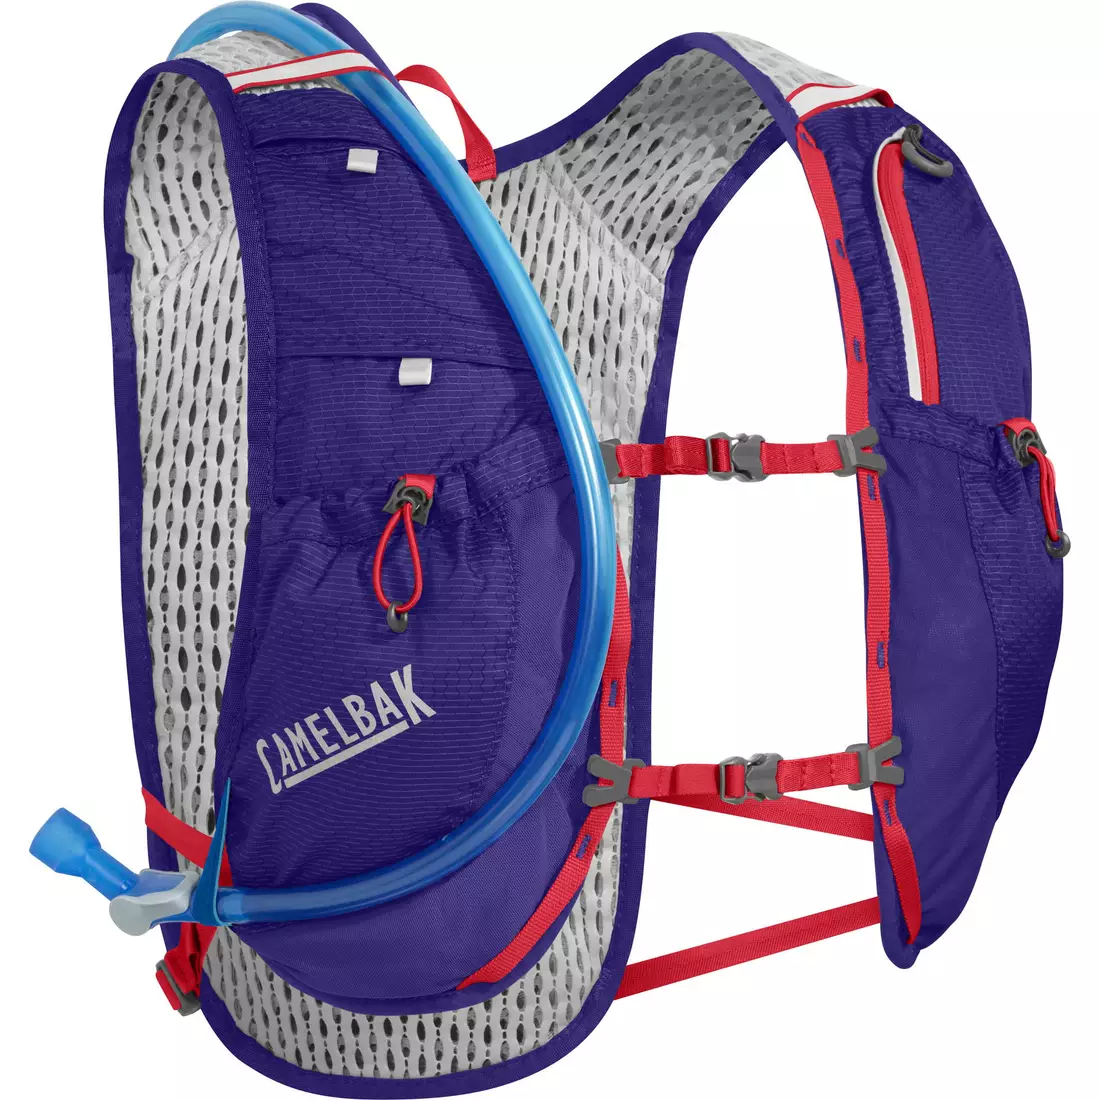 Camelbak SS17 backpack / running vest with bladder Circuit Vest 50oz / 1.5L Deep Amethyst/Fiery Coral 1138402900